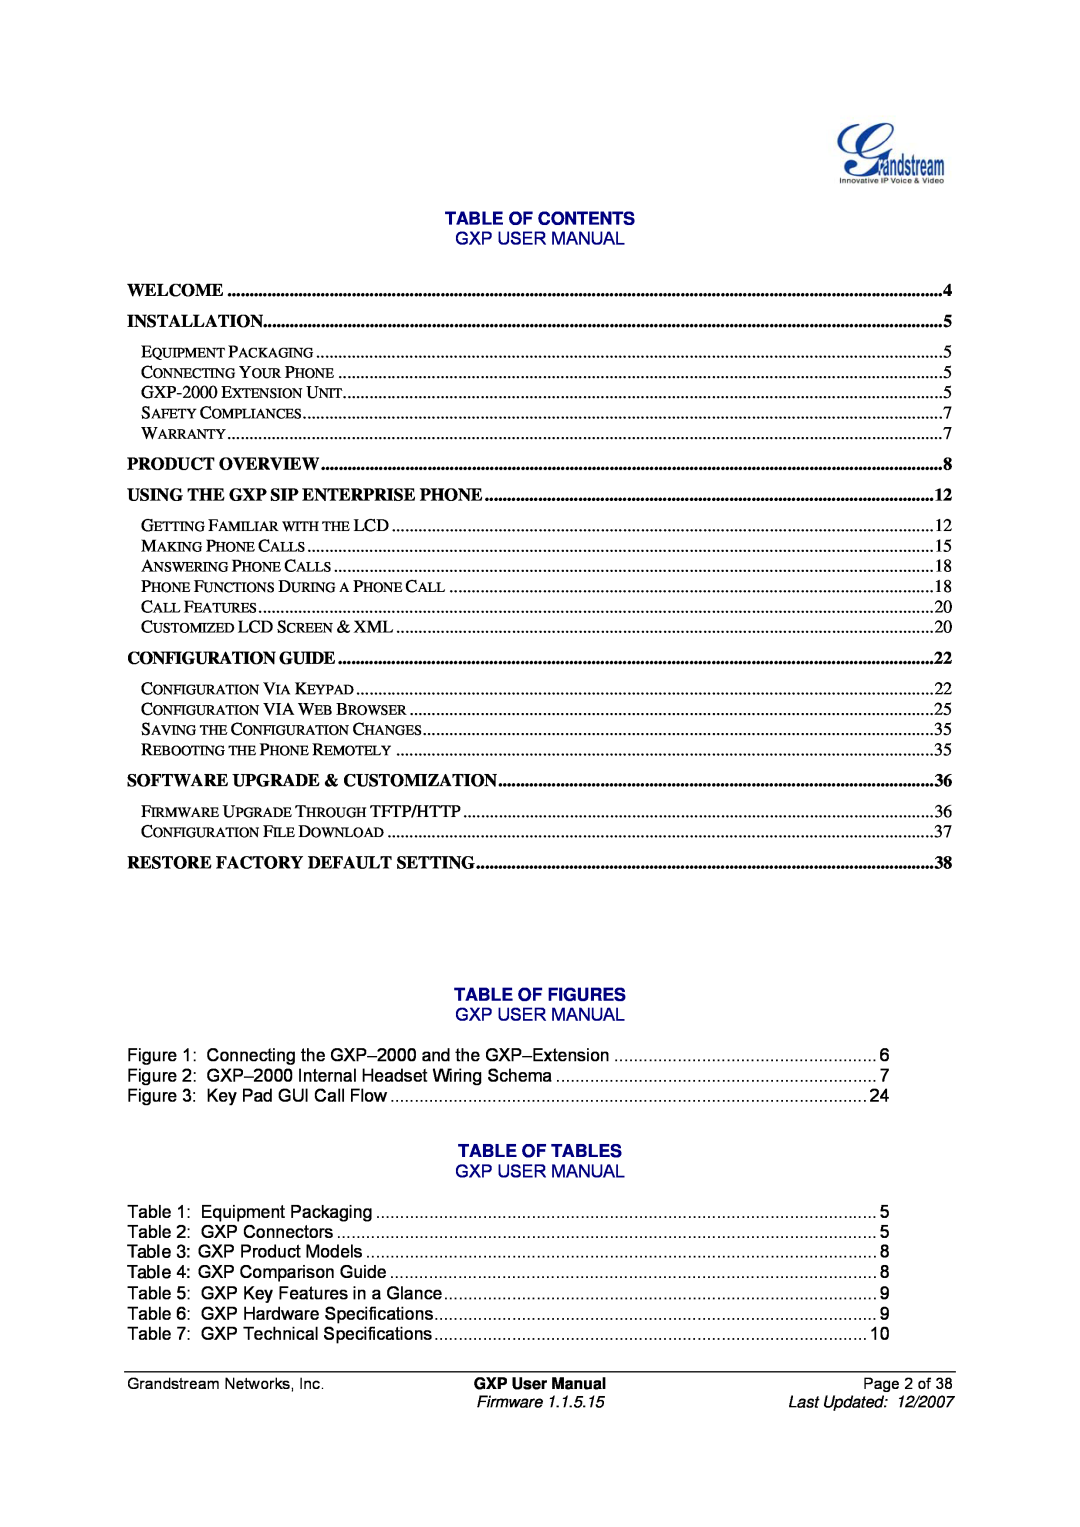 Grandstream Networks GXP-2010 Table Of Contents, Table Of Figures, Table Of Tables, Welcome, Installation, Gxp User Manual 